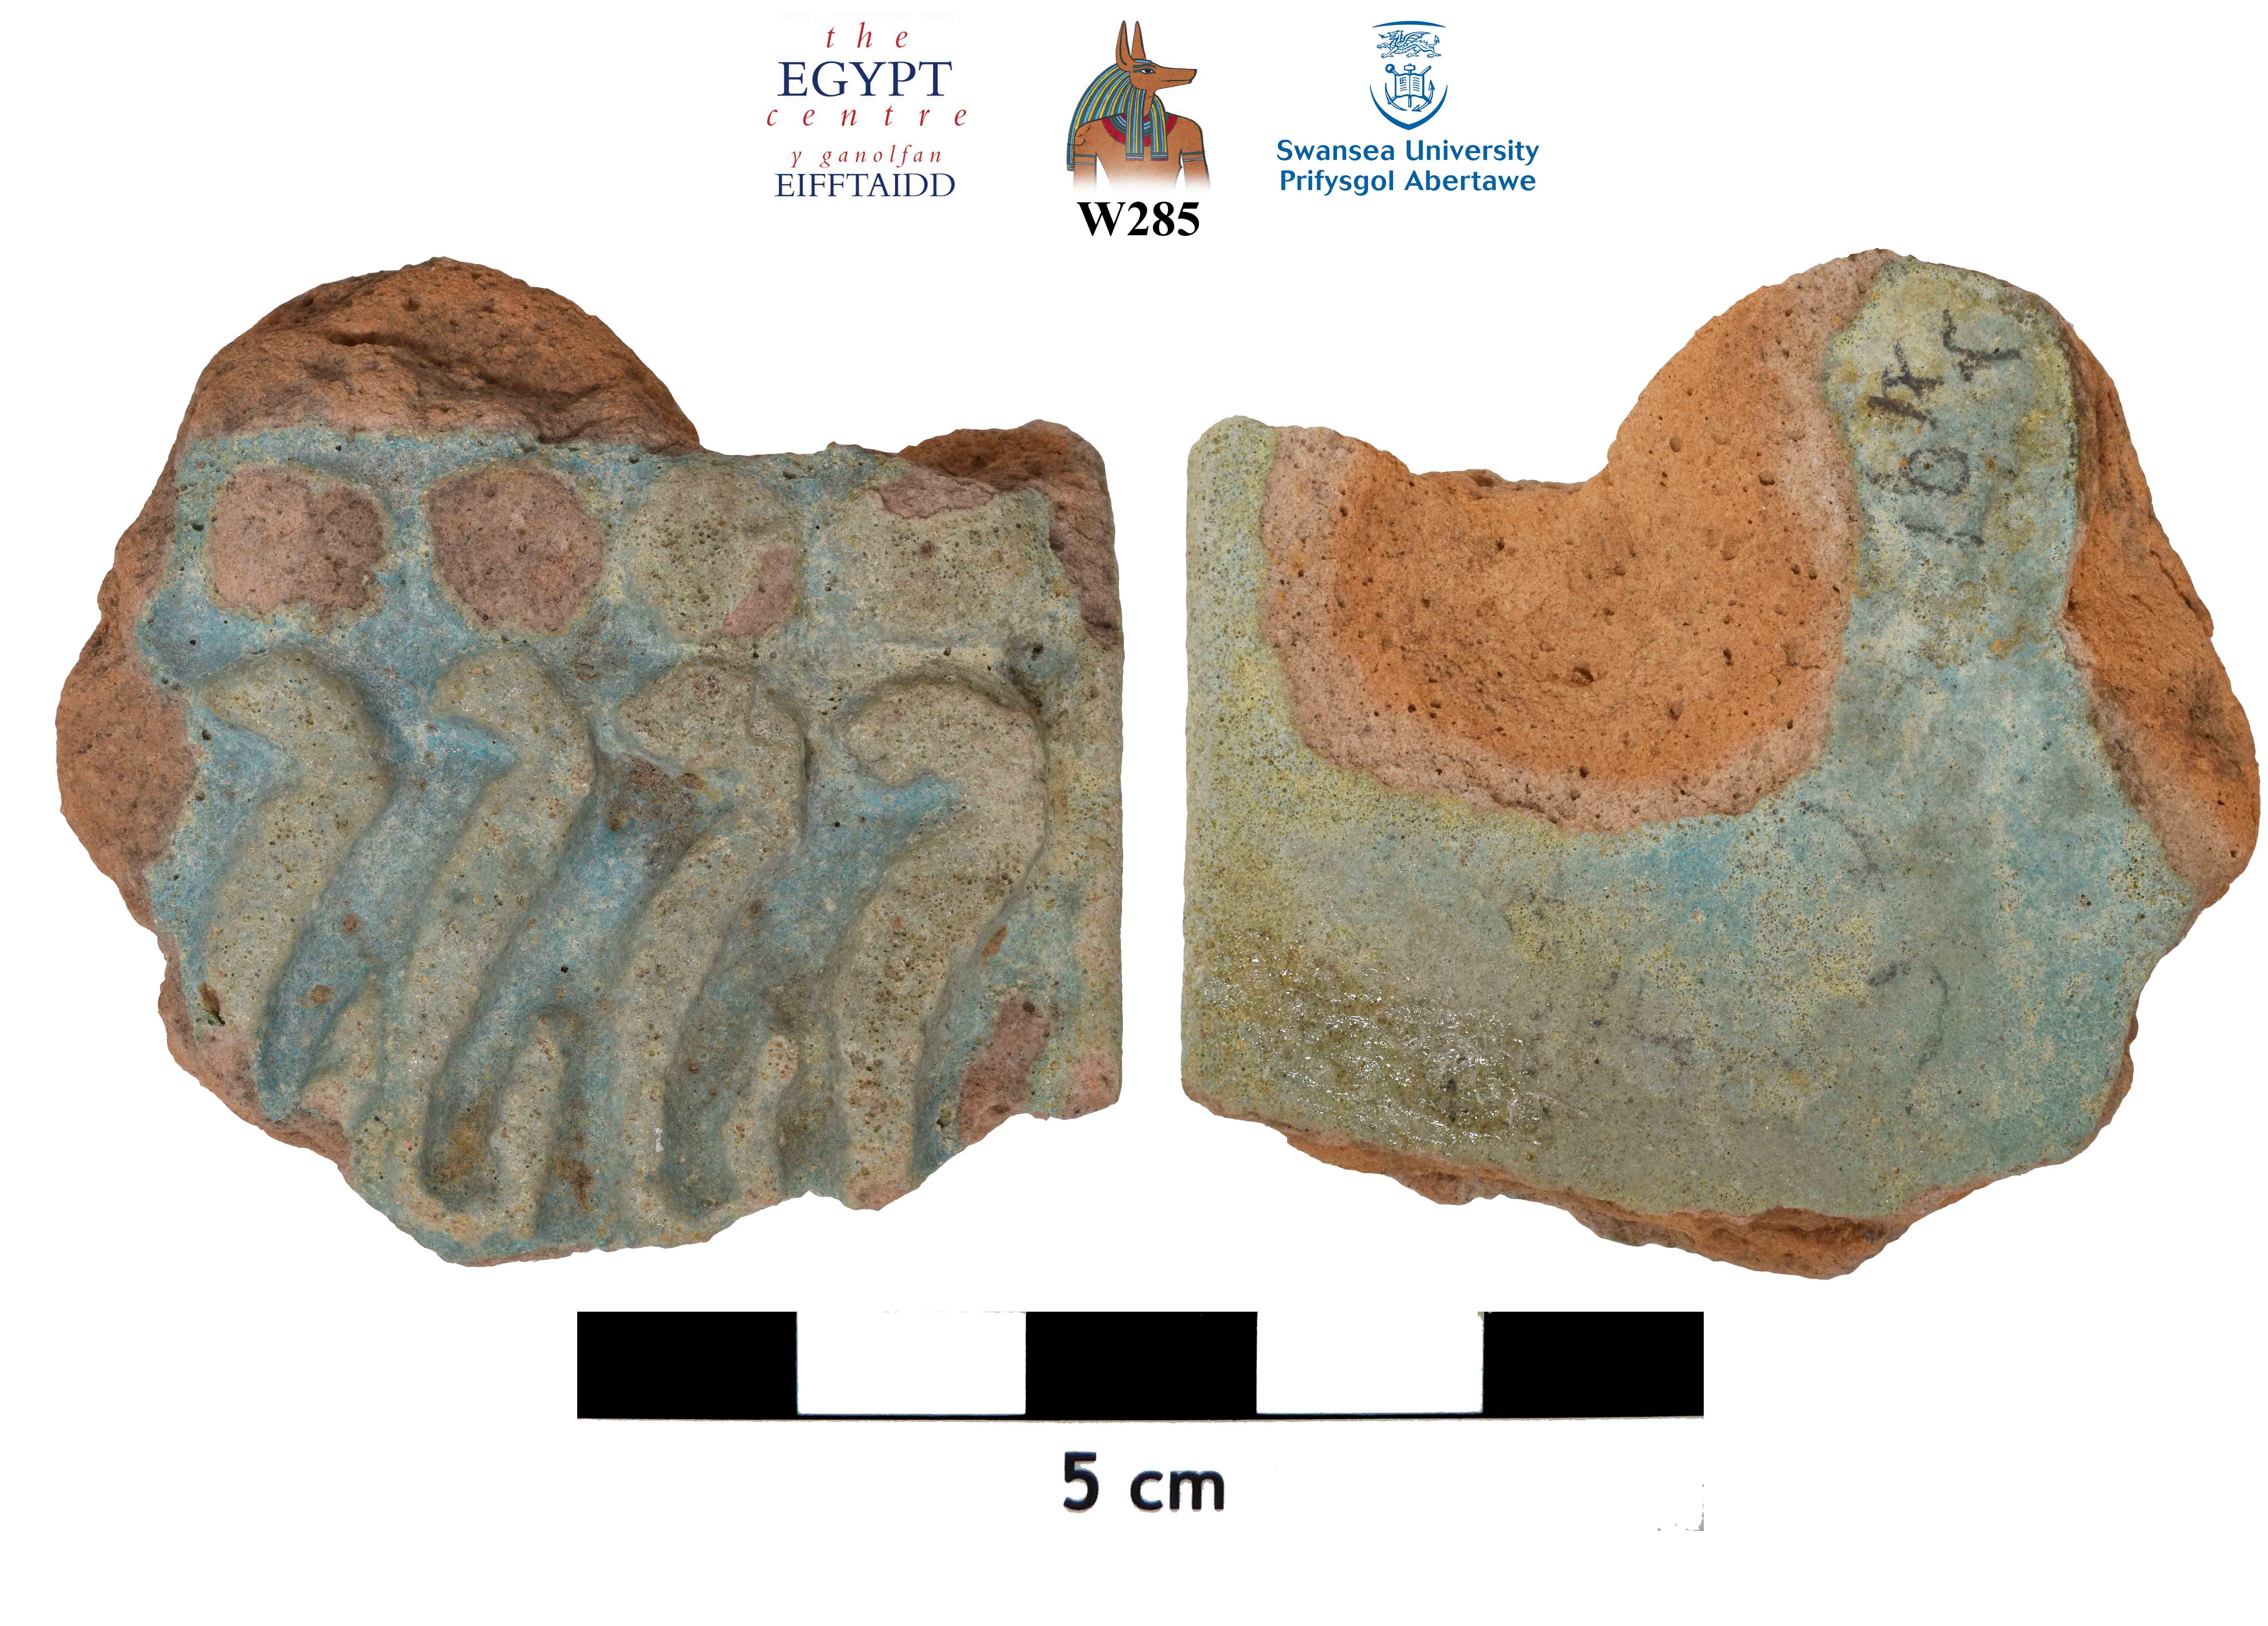 Image for: Fragment of a faience shrine